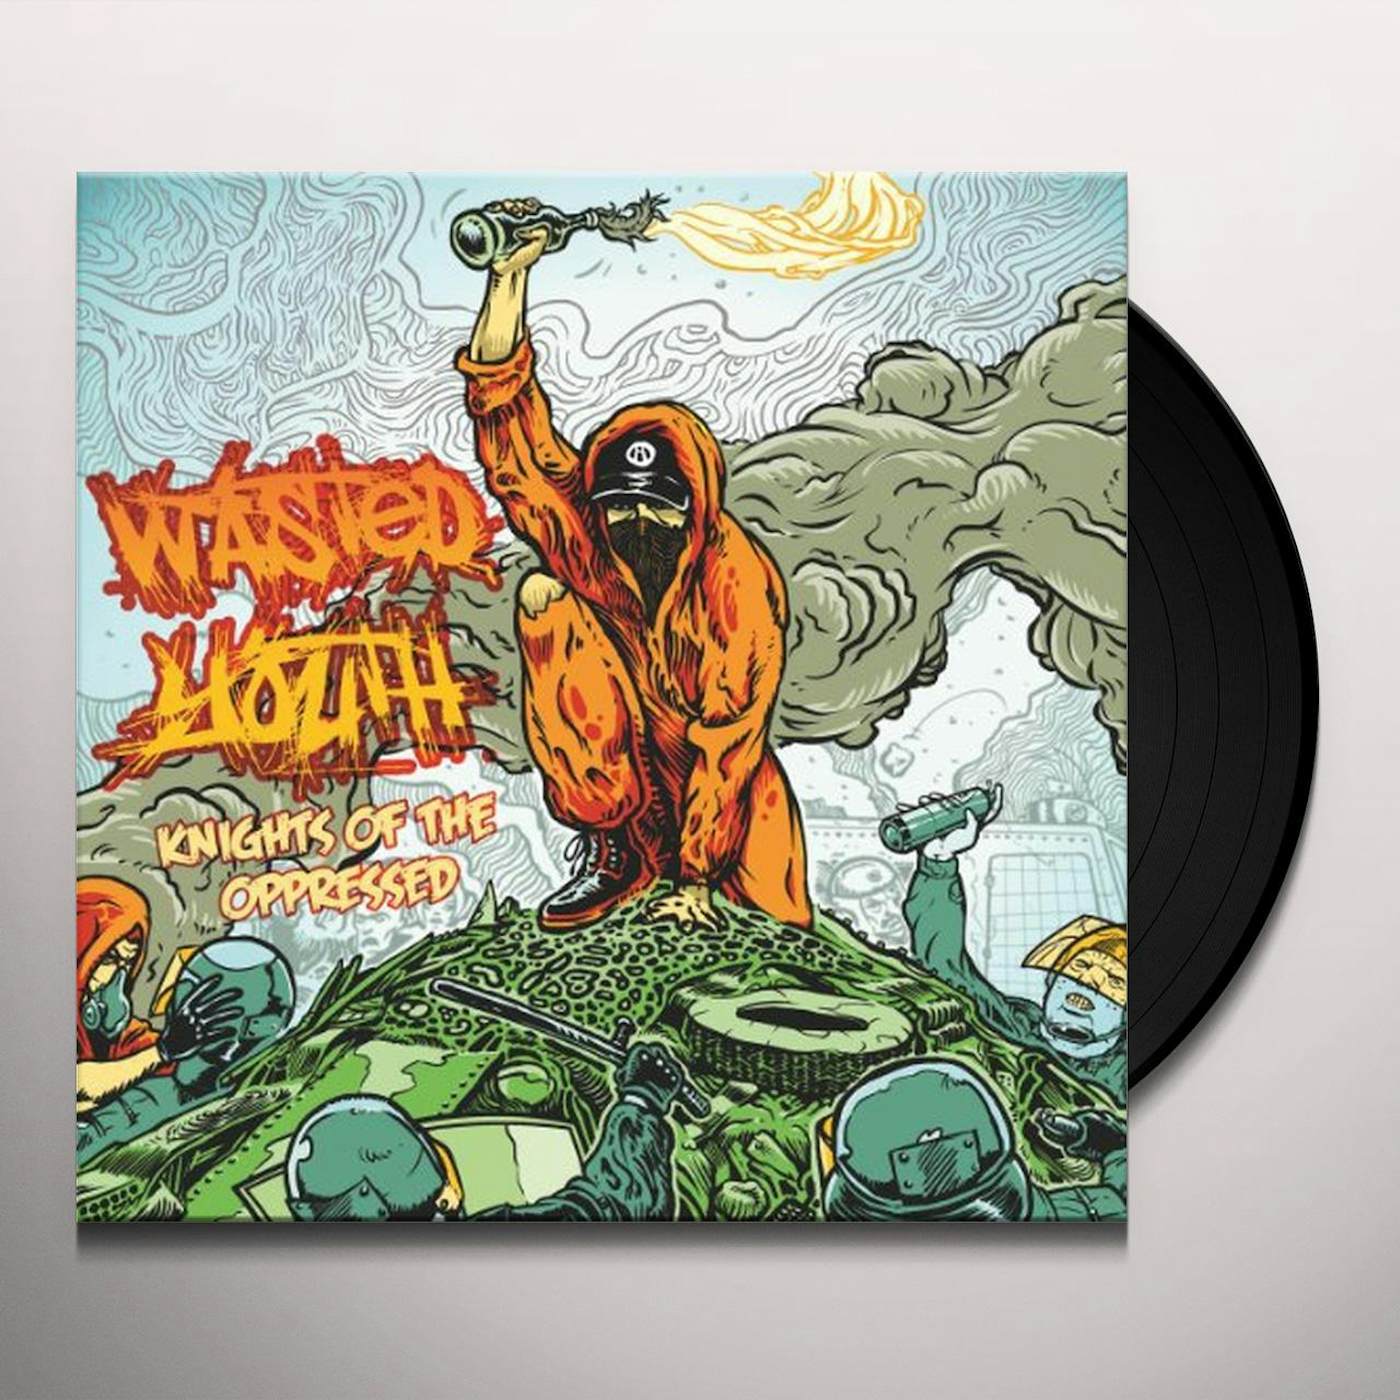 Wasted Youth Knights Of The Oppressed Vinyl Record